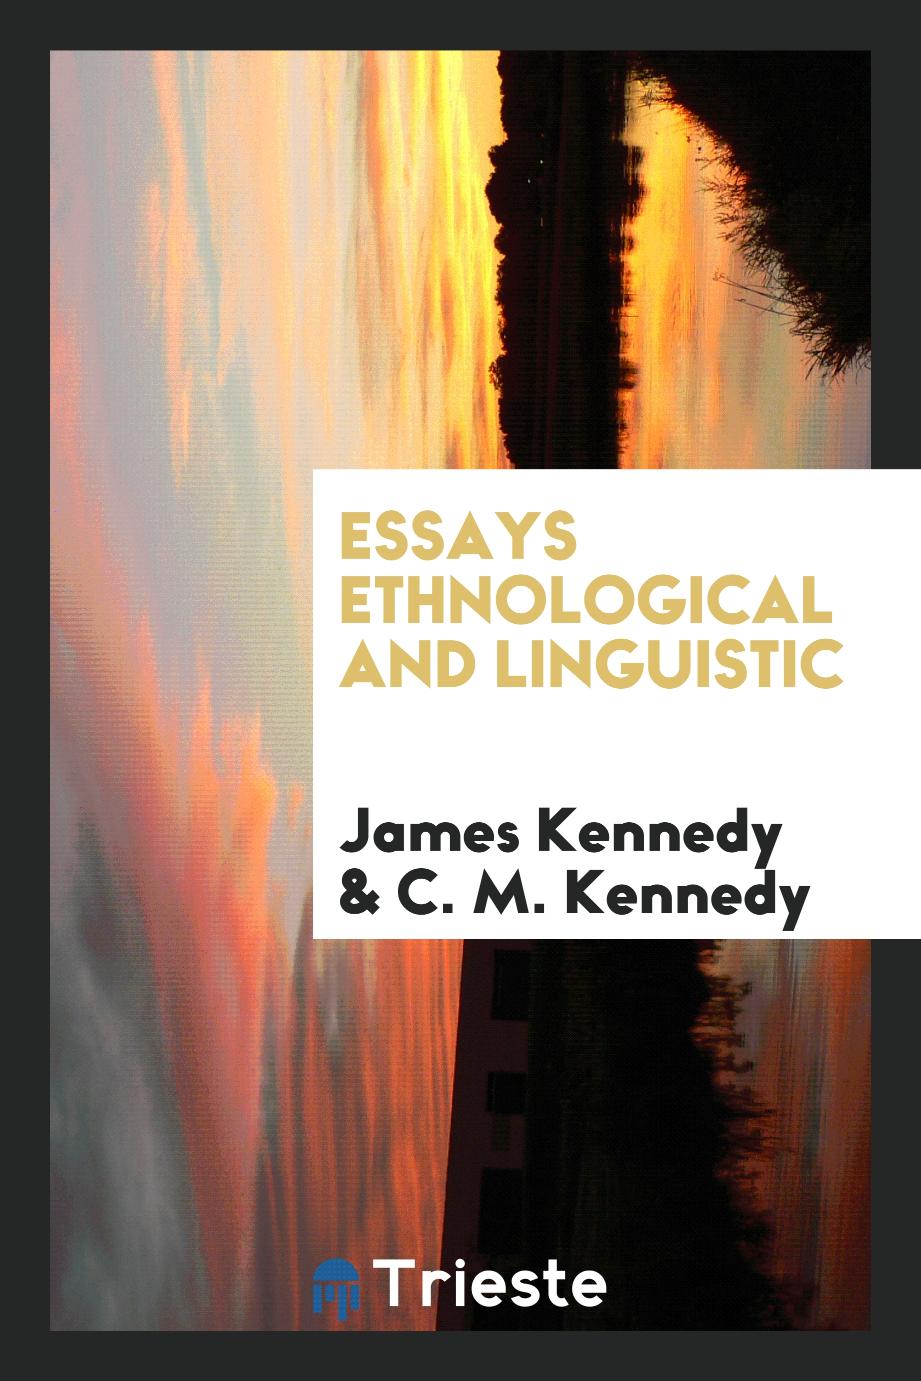 James Kennedy, C. M. Kennedy - Essays Ethnological and Linguistic